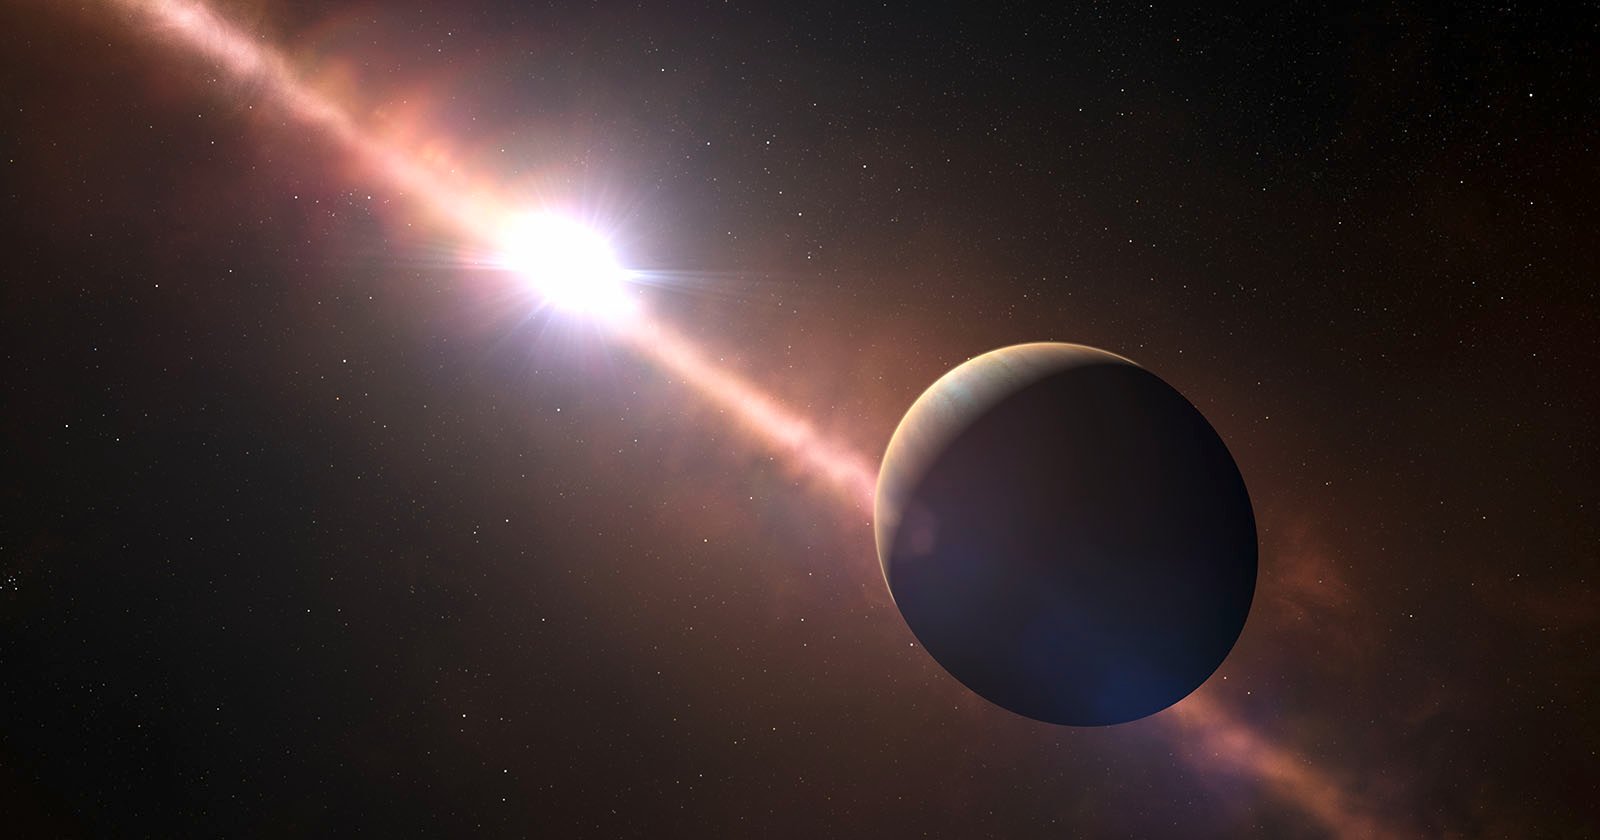  year timelapse shows mysterious exoplanet orbit 